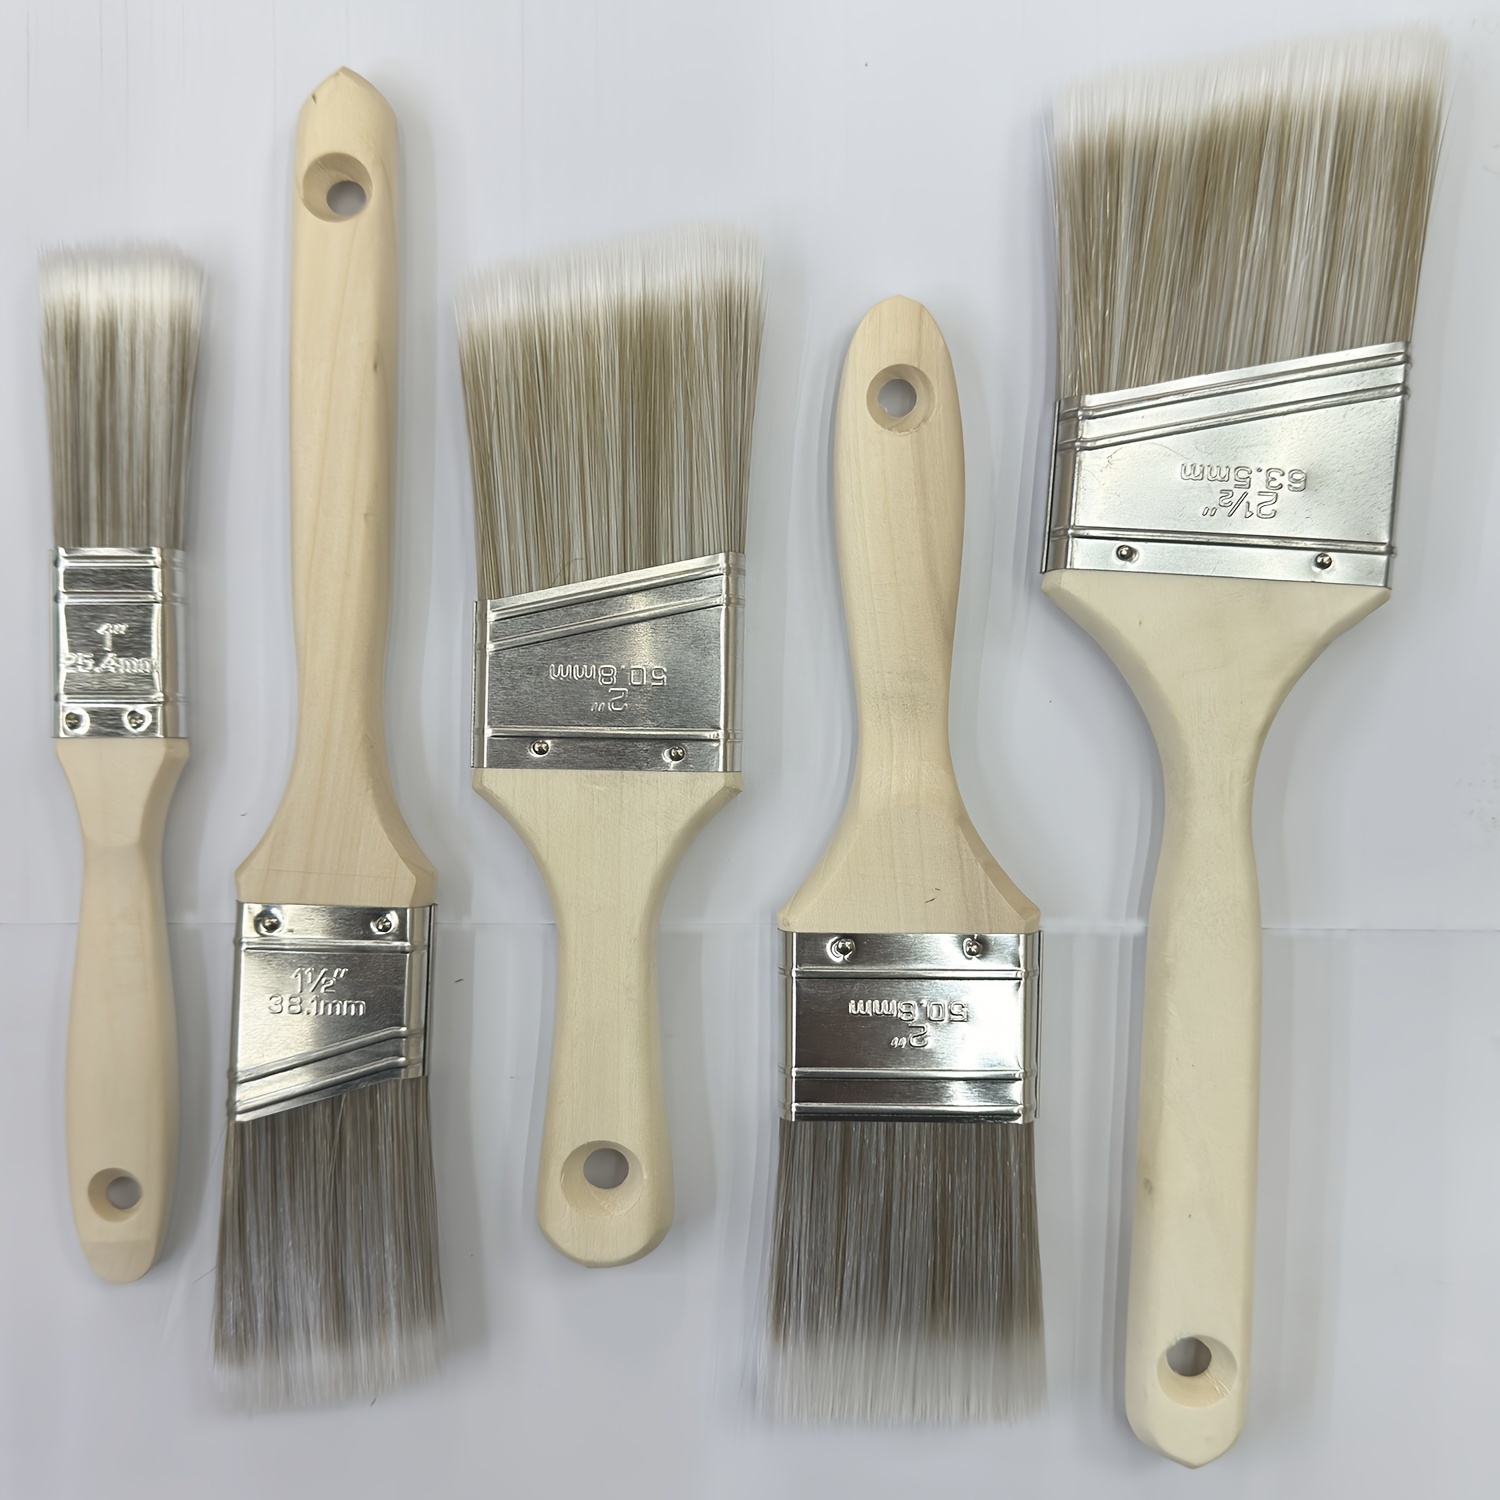 

5-piece Professional Paint Brush Set - Wood Handle And Plastic Fiber Bristle Brushes For Furniture, Touch-ups, Latex, And Oil-based Paints And Stains - Home Decor For Indoor And Outdoor Use